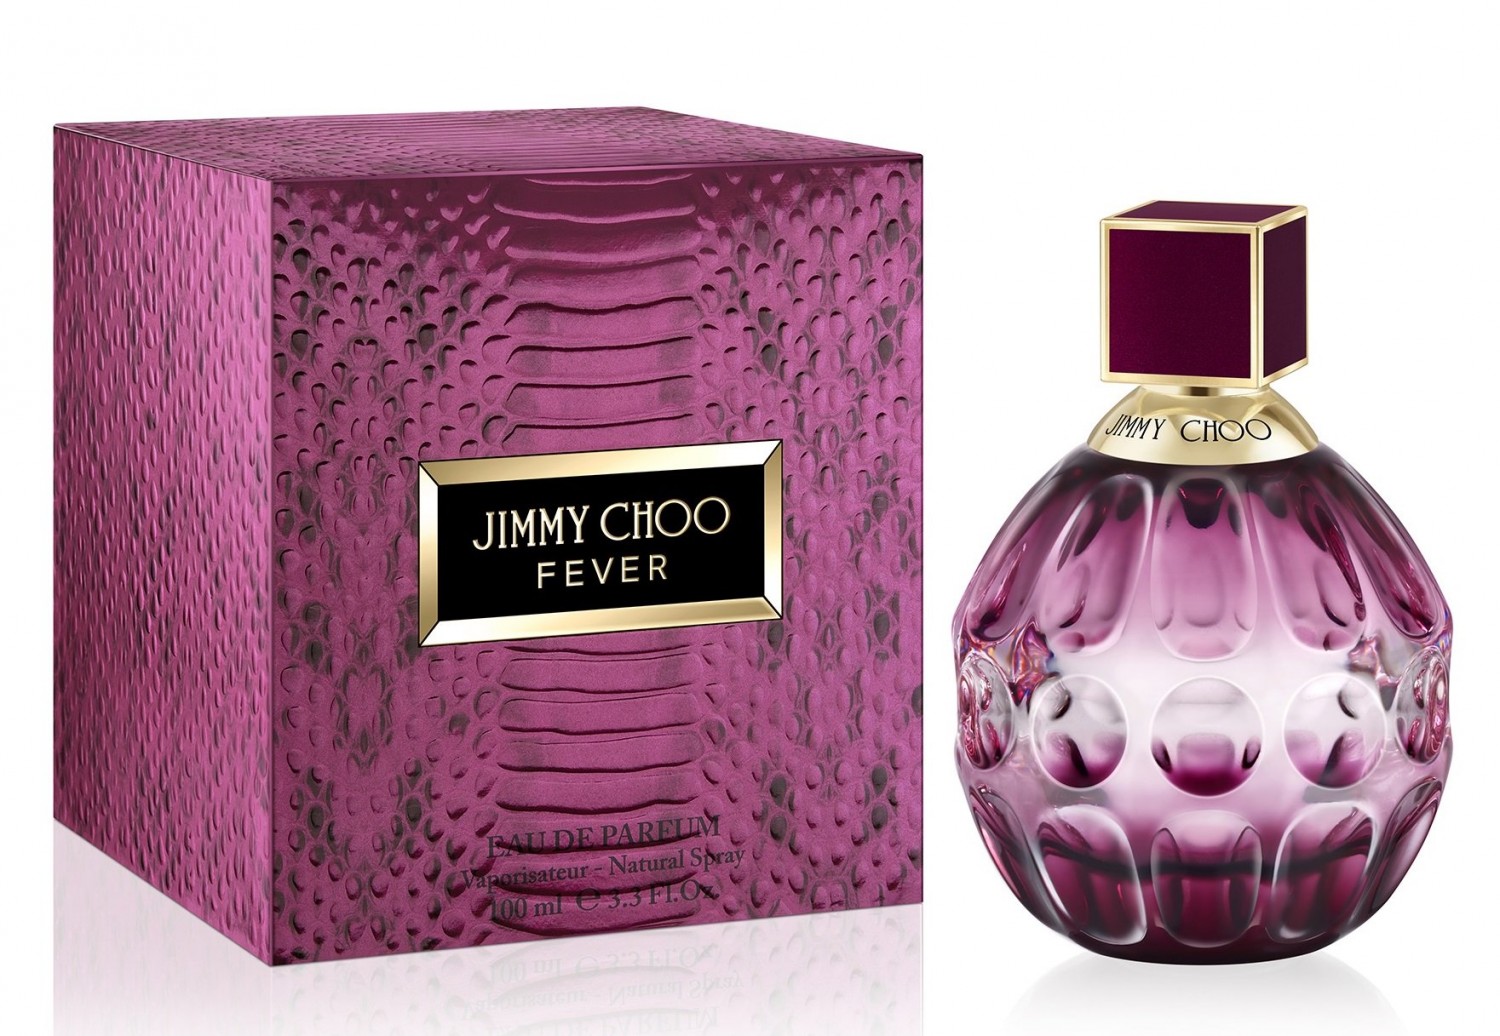 Jimmy Choo Fever Perfume Review, Price, Coupon - PerfumeDiary